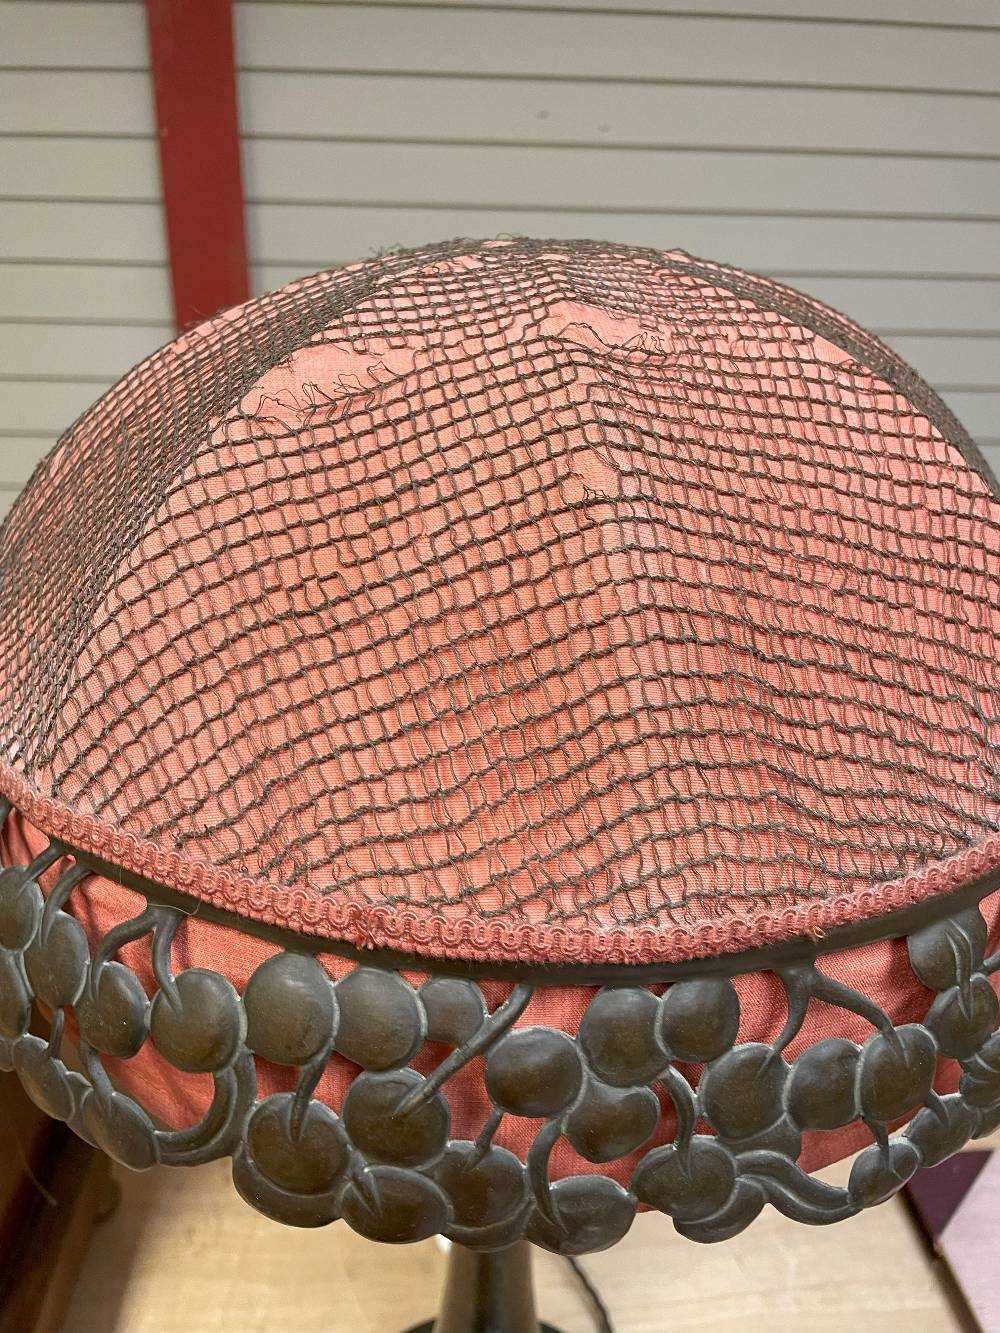 MOGENS BALLIN FOR HERTZ BALLIN, DENMARK, Art Nouveau copper table lamp, with red domed and netted - Image 9 of 13